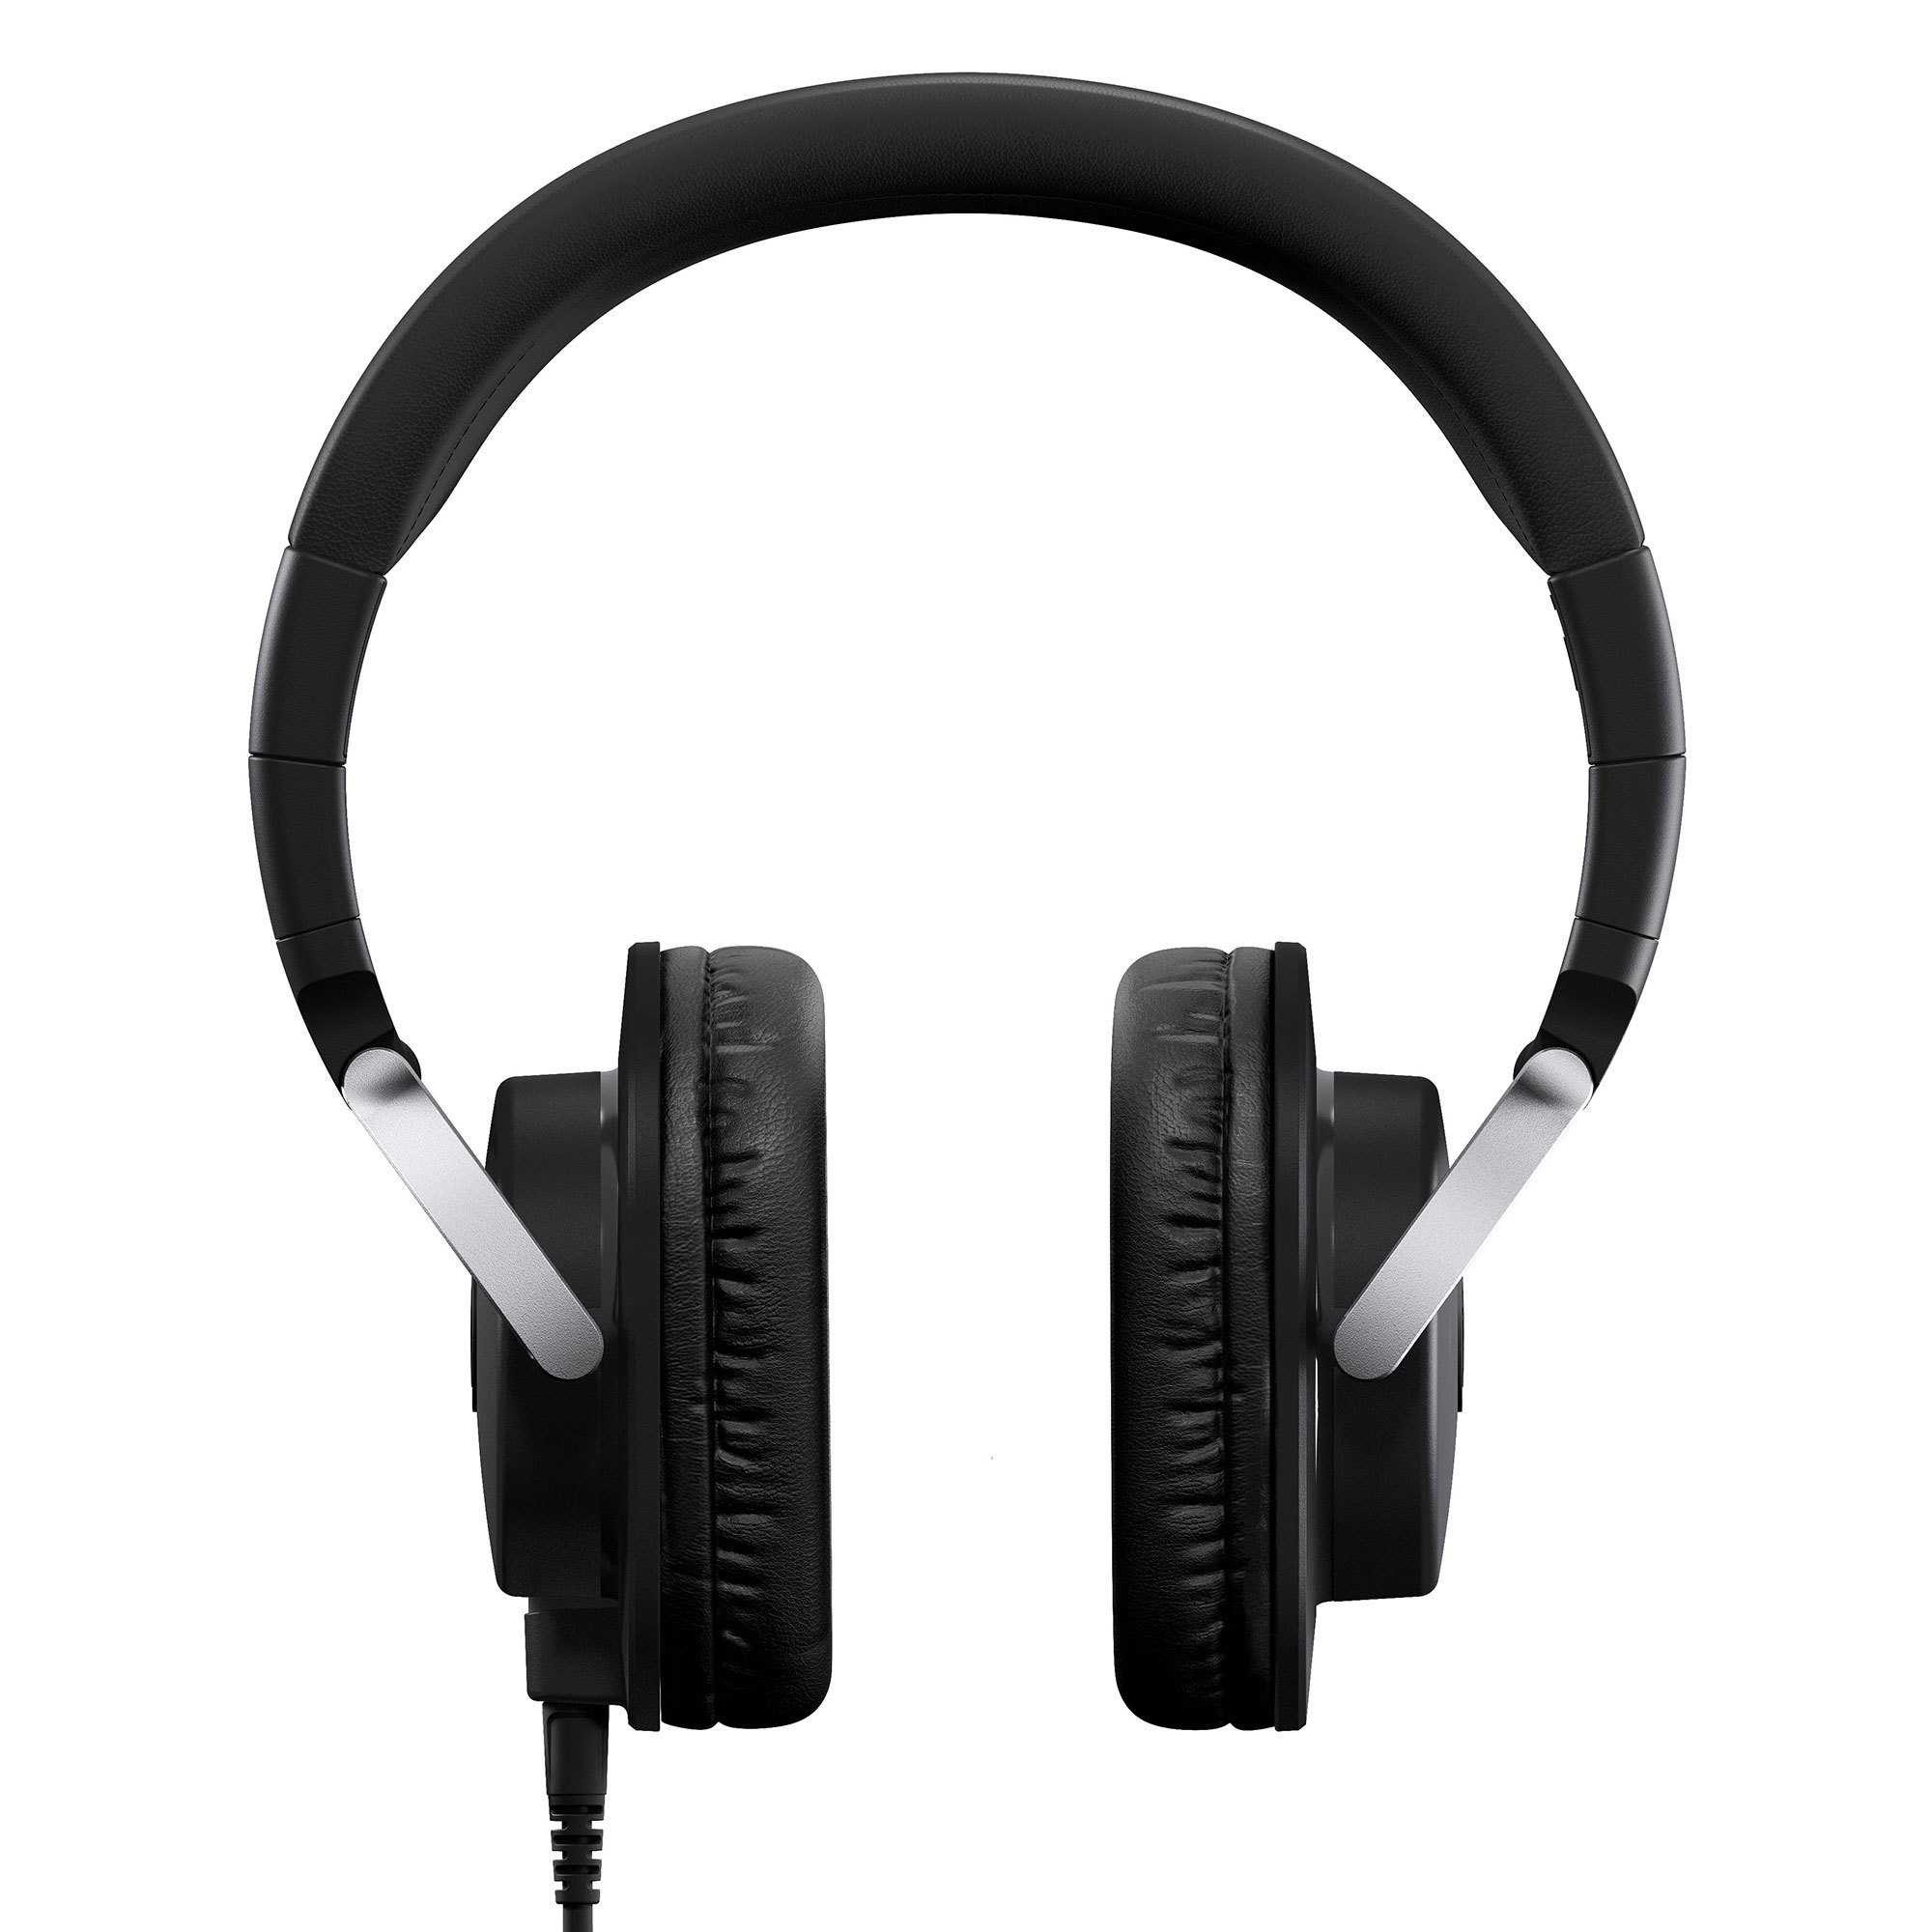 HPH-MT8 - Overview - Headphones - Professional Audio - Products 